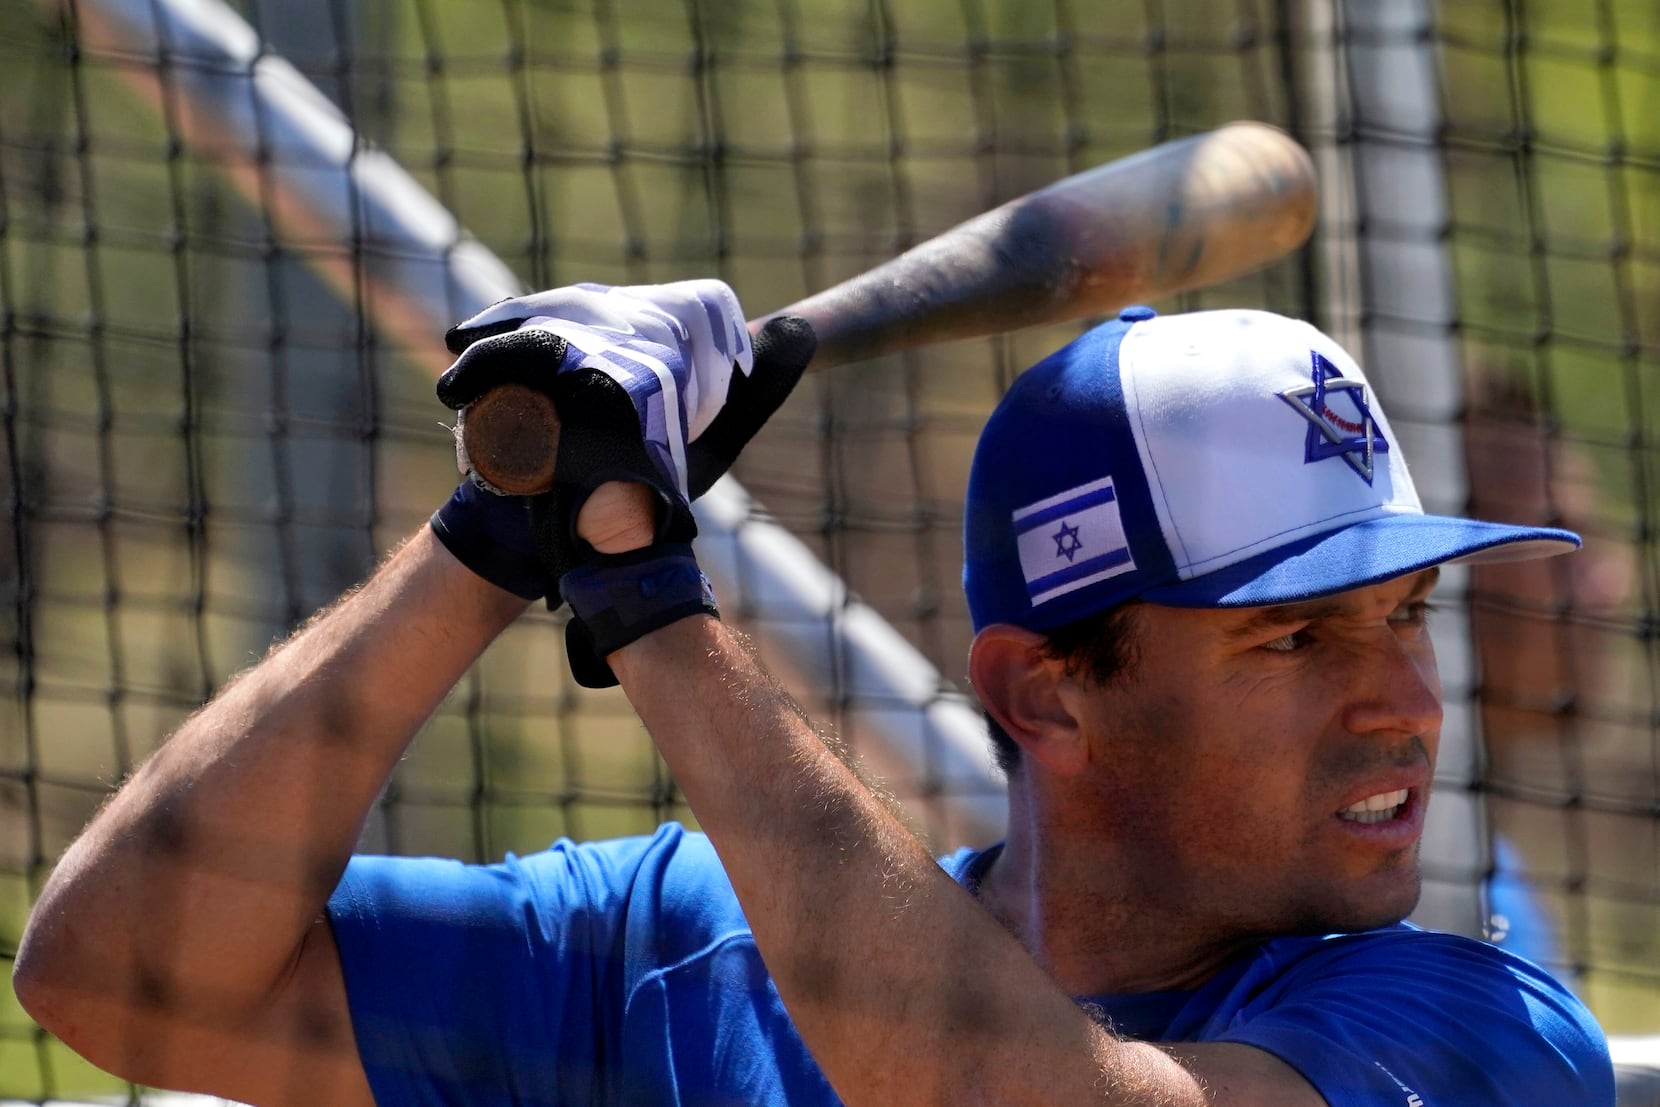 You grab ahold of your people': Former MLB star Ian Kinsler leads a new  team in Israel – The Forward